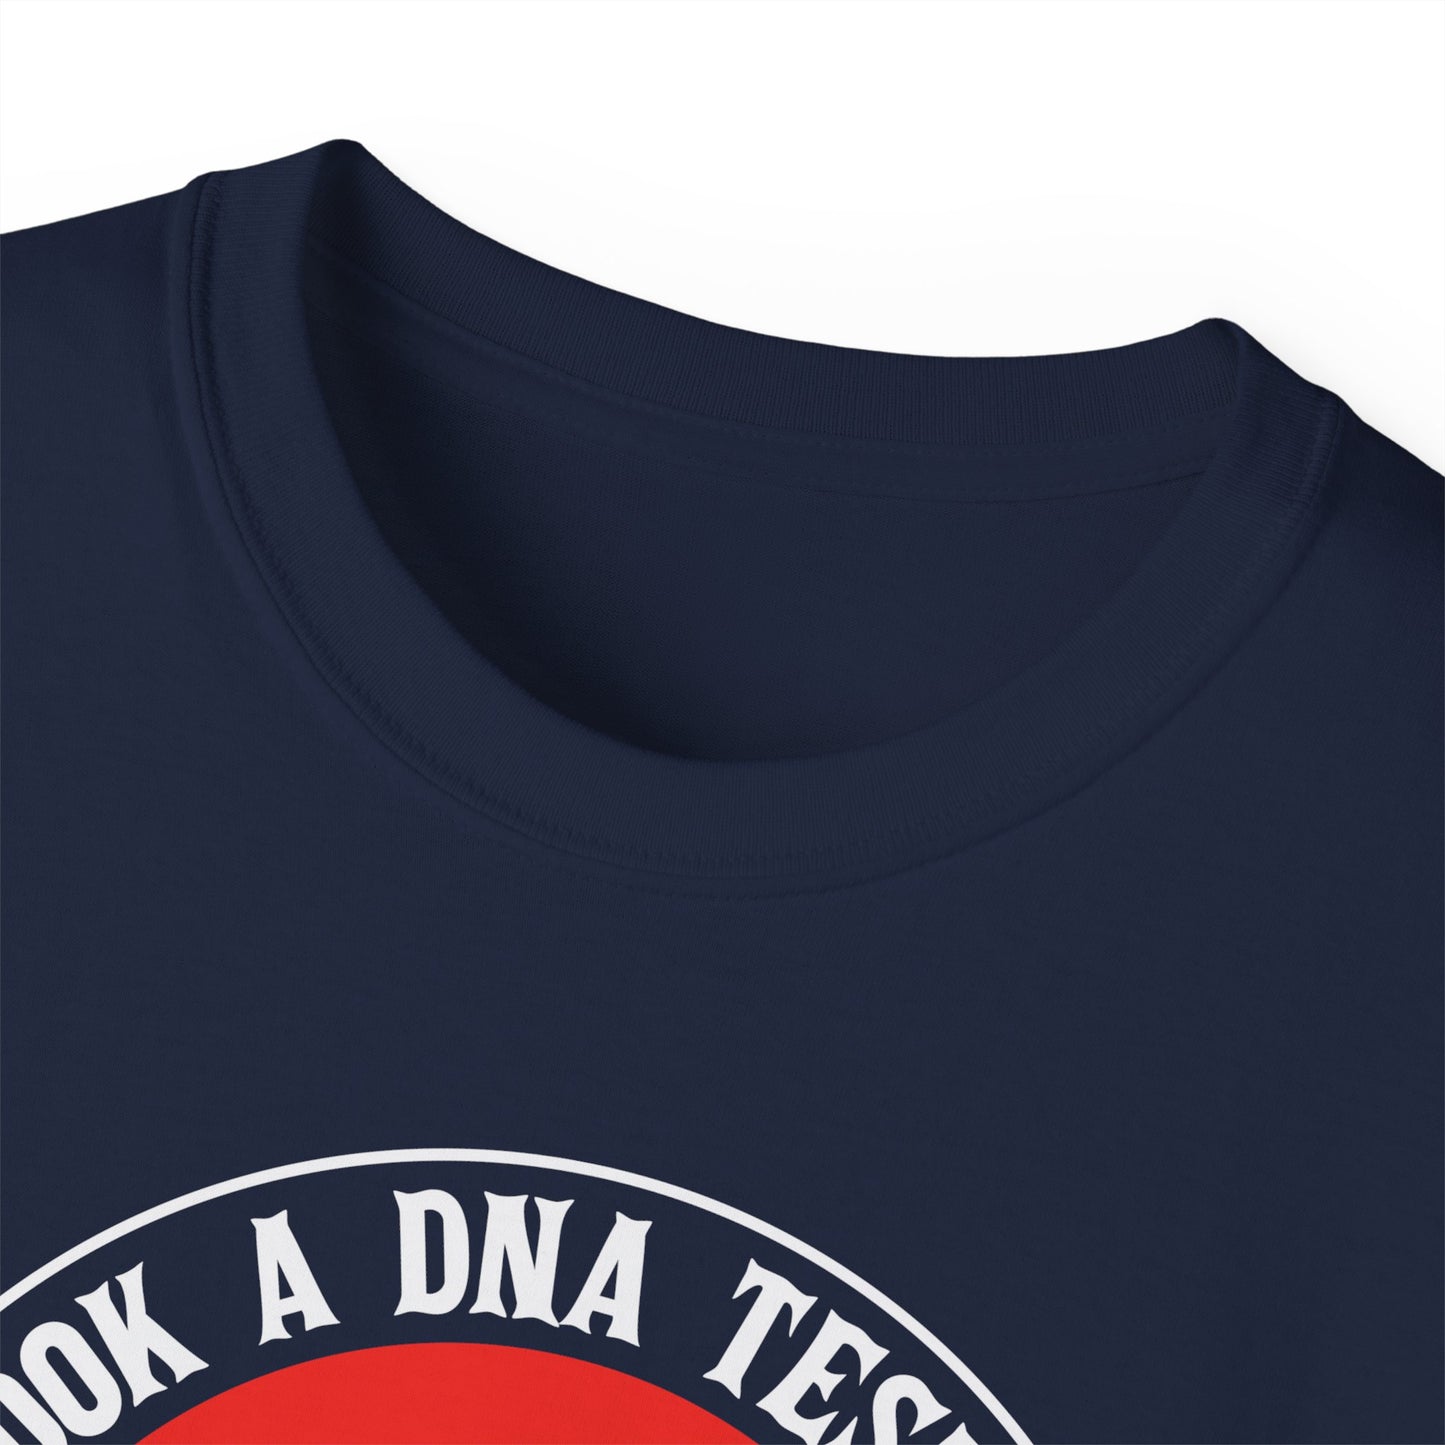 I Took A DNA Test And God Is My Father Unisex Christian Ultra Cotton Tee Printify